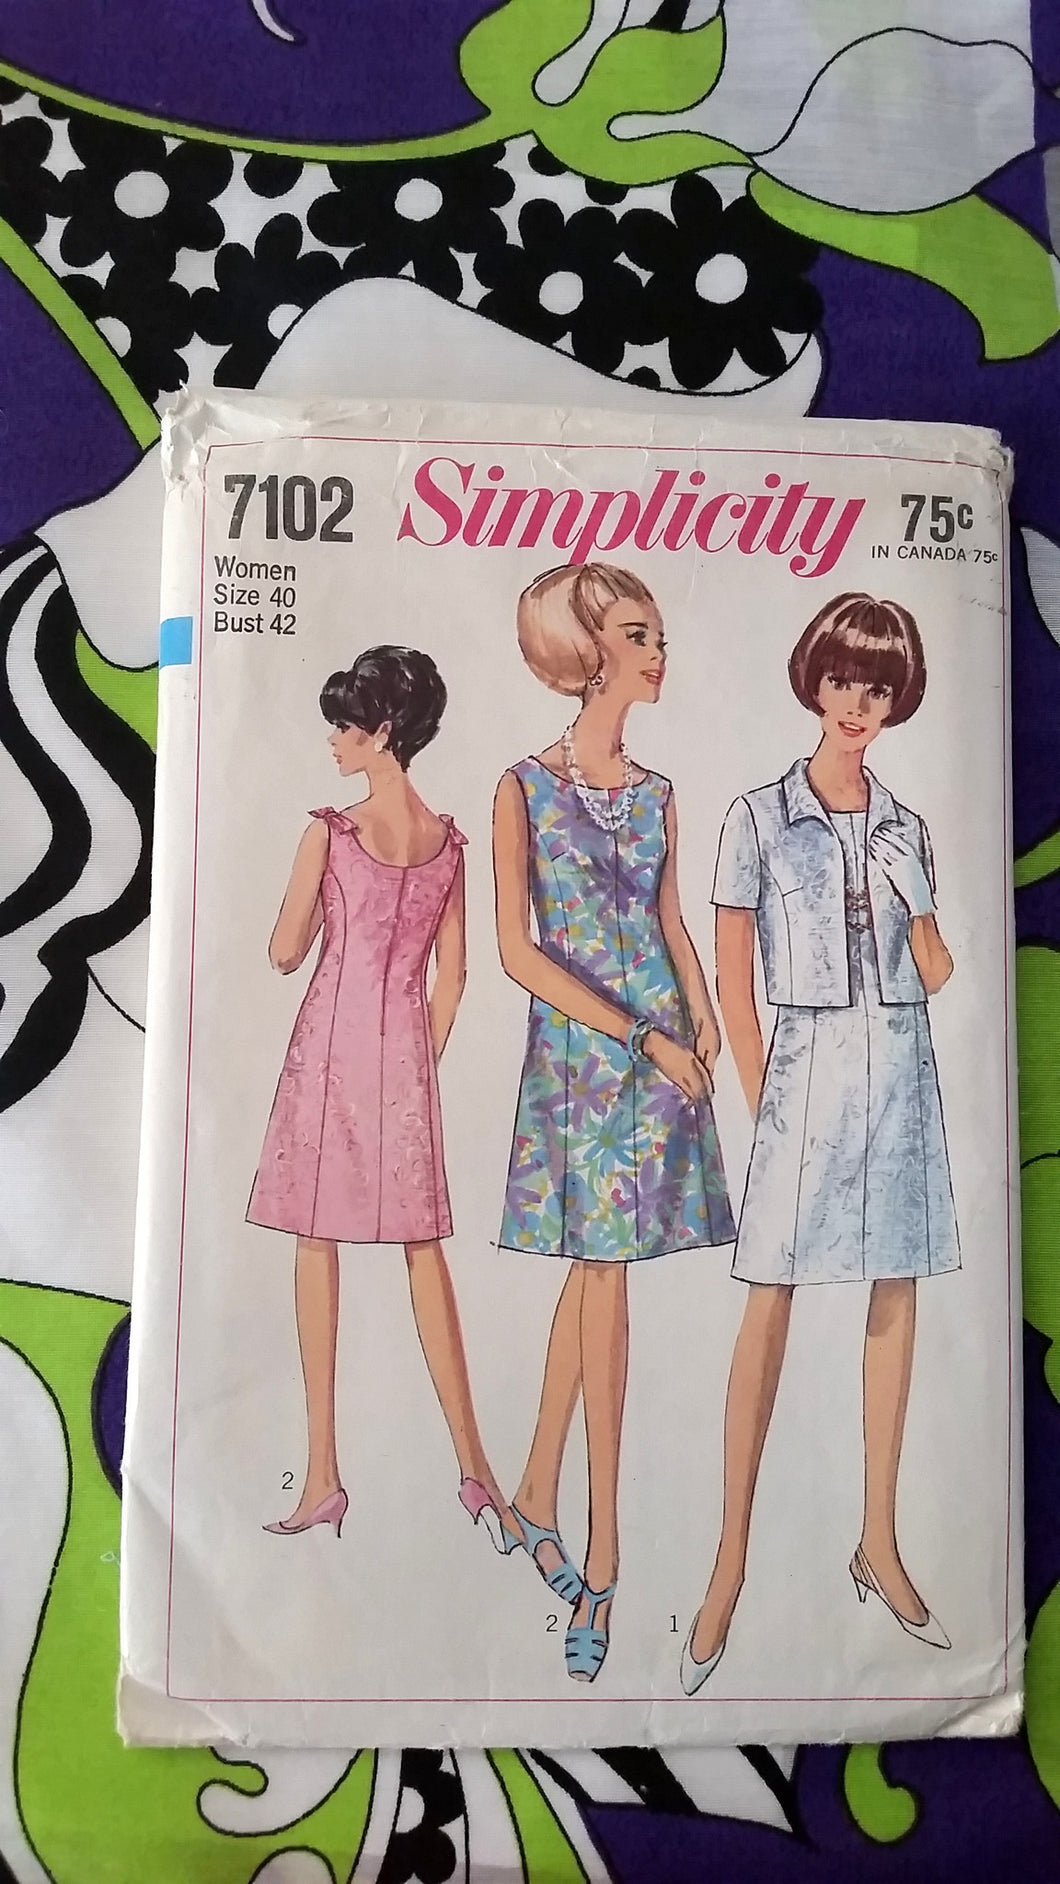 1967 Simplicity Vintage Sewing Pattern 7102 - One Piece Dress - Size 40